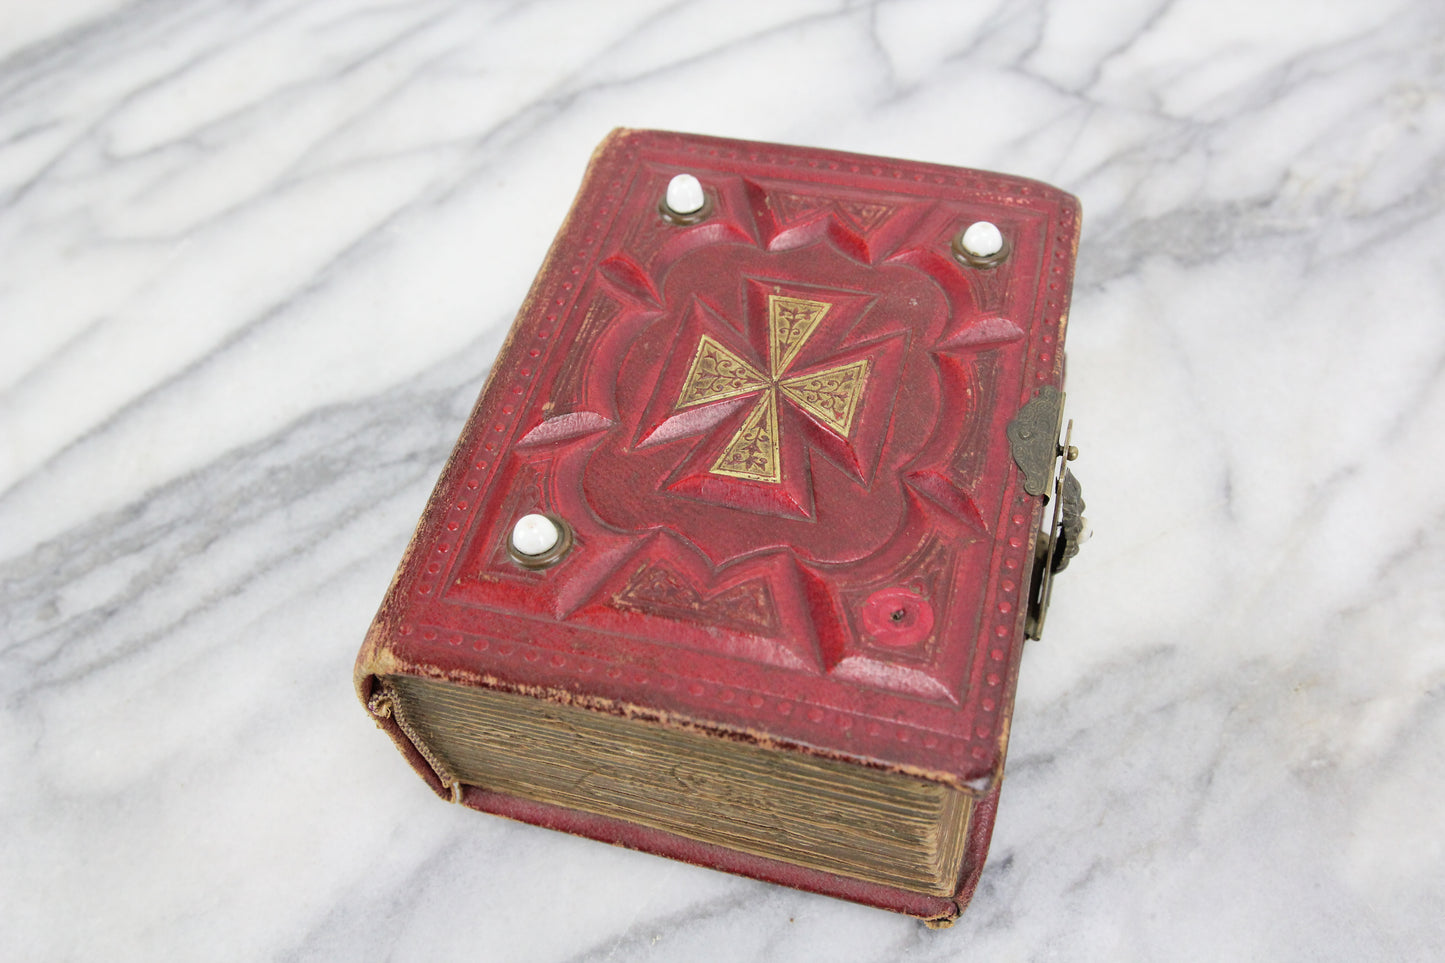 Intact Antique Photo Album with Tintype and Cabinet Card Photographs